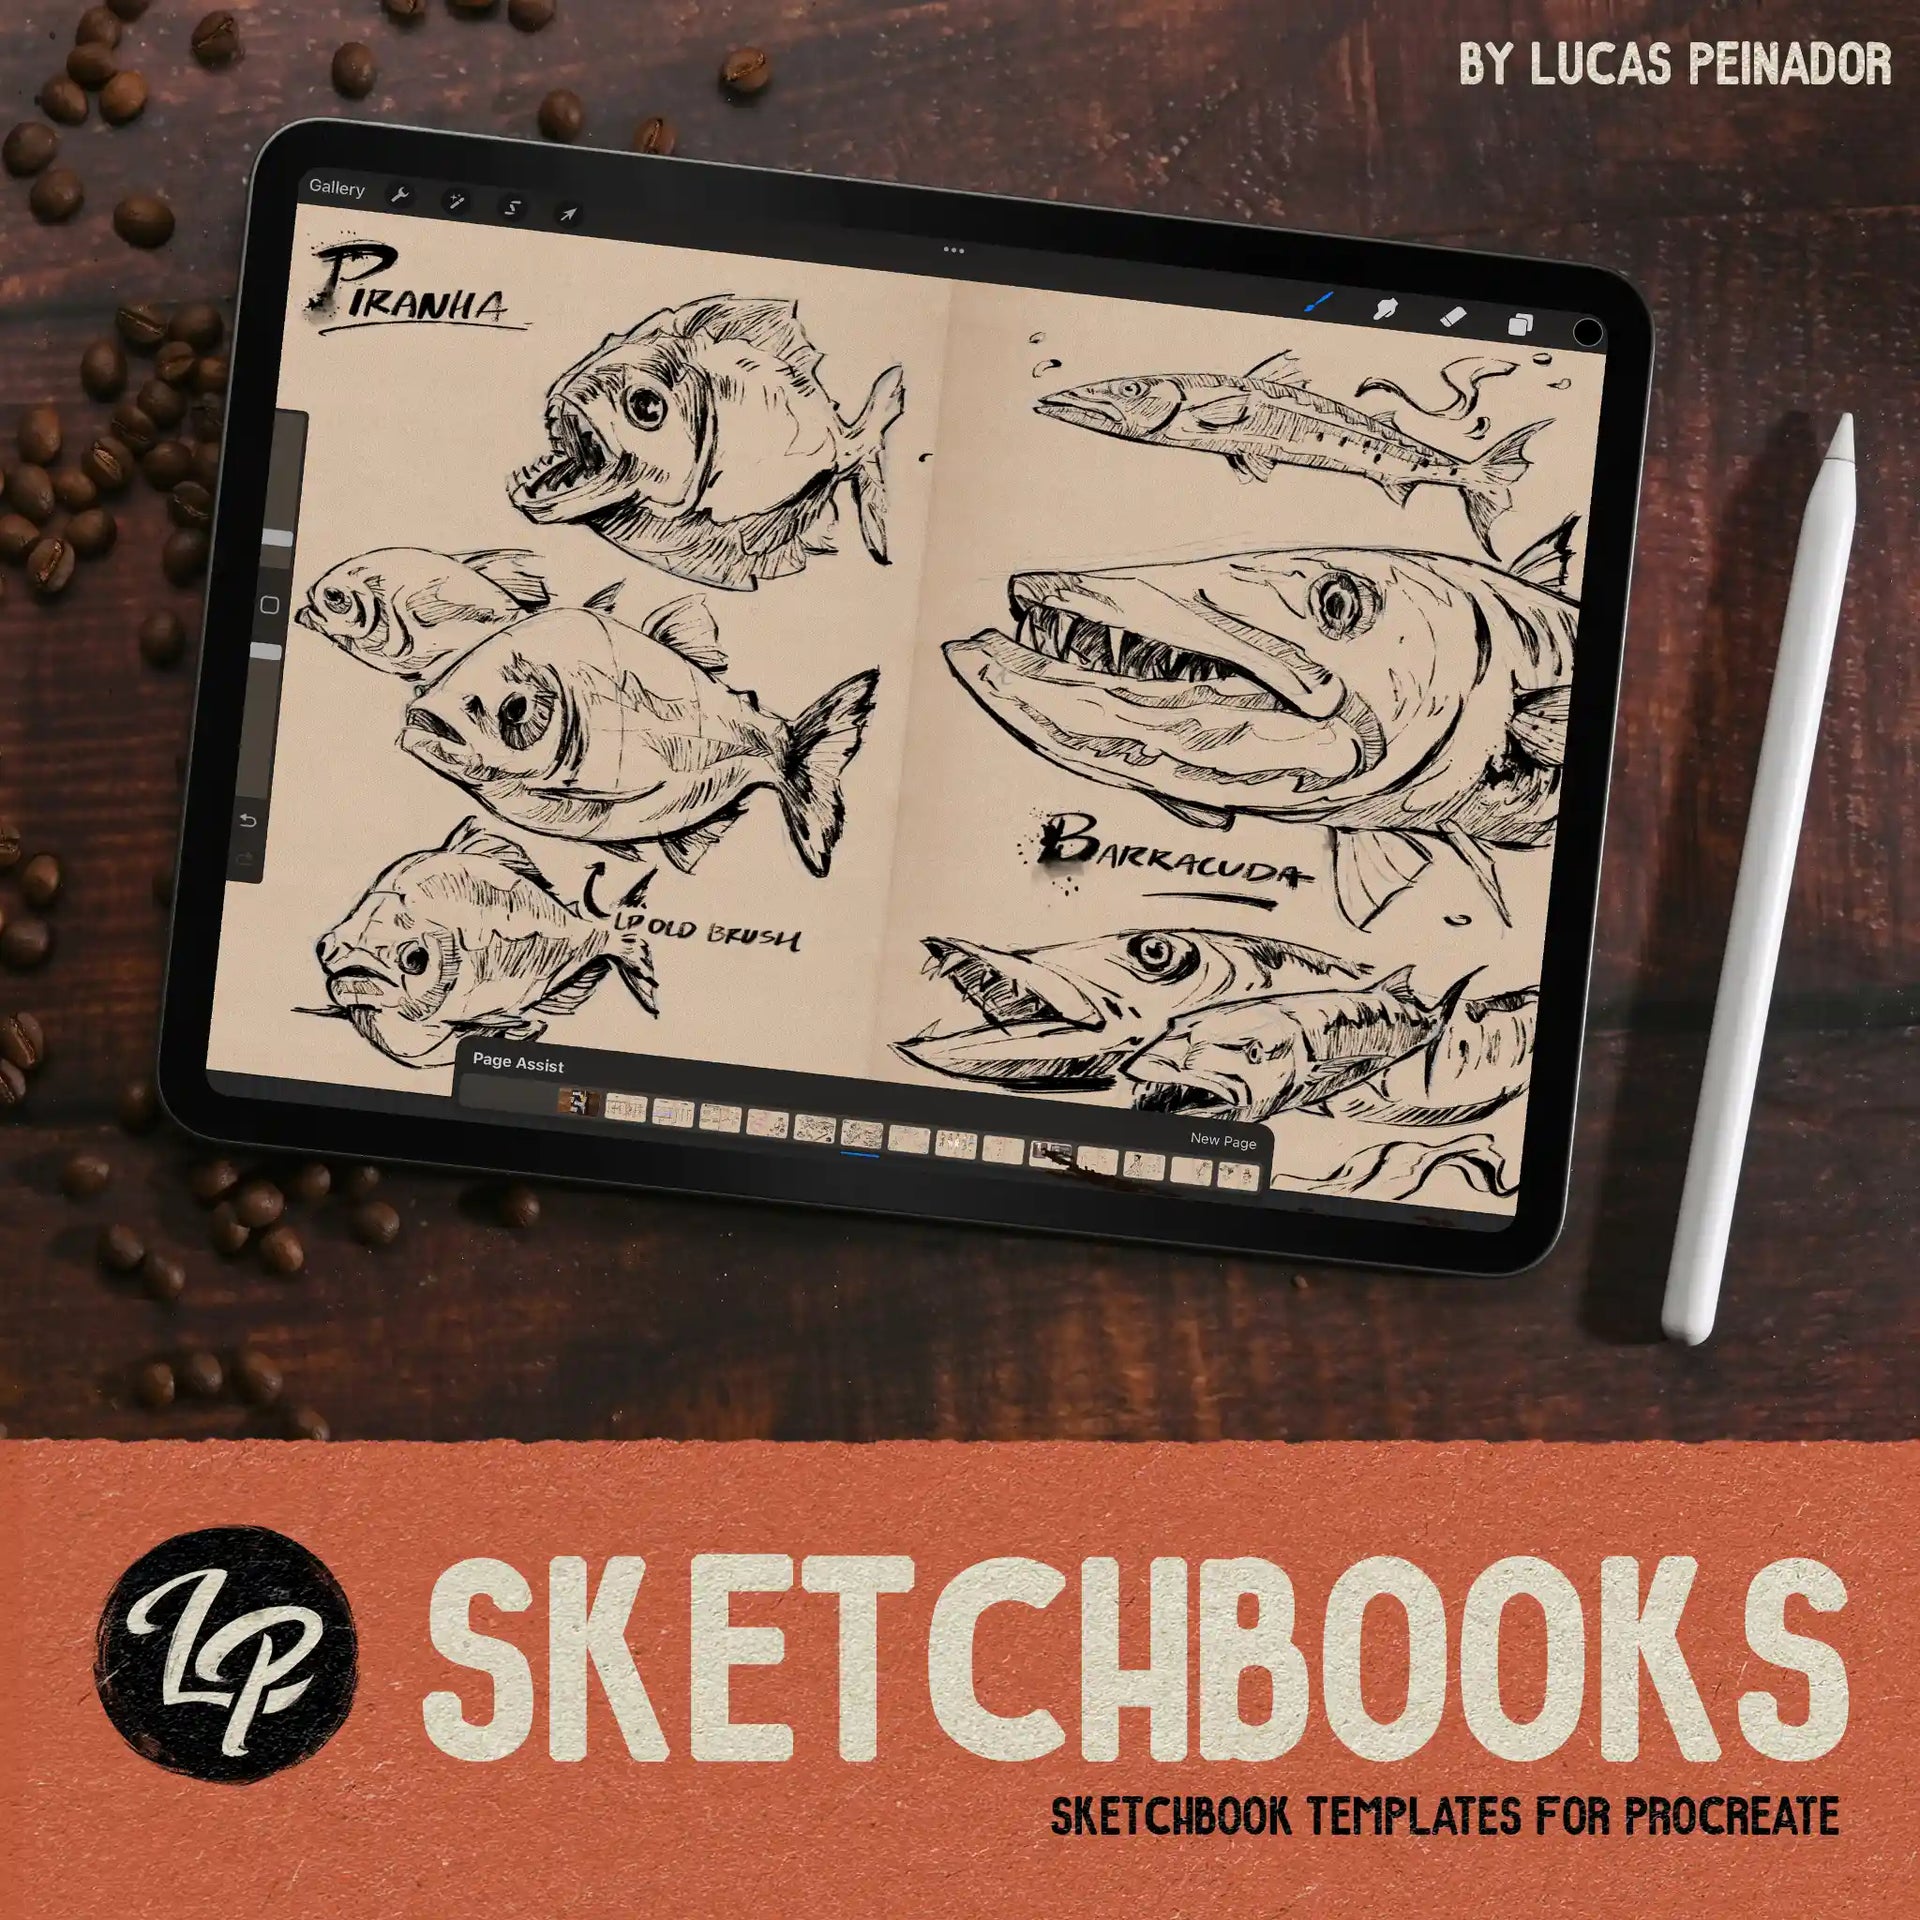 The Sketchbook Experience for Procreate